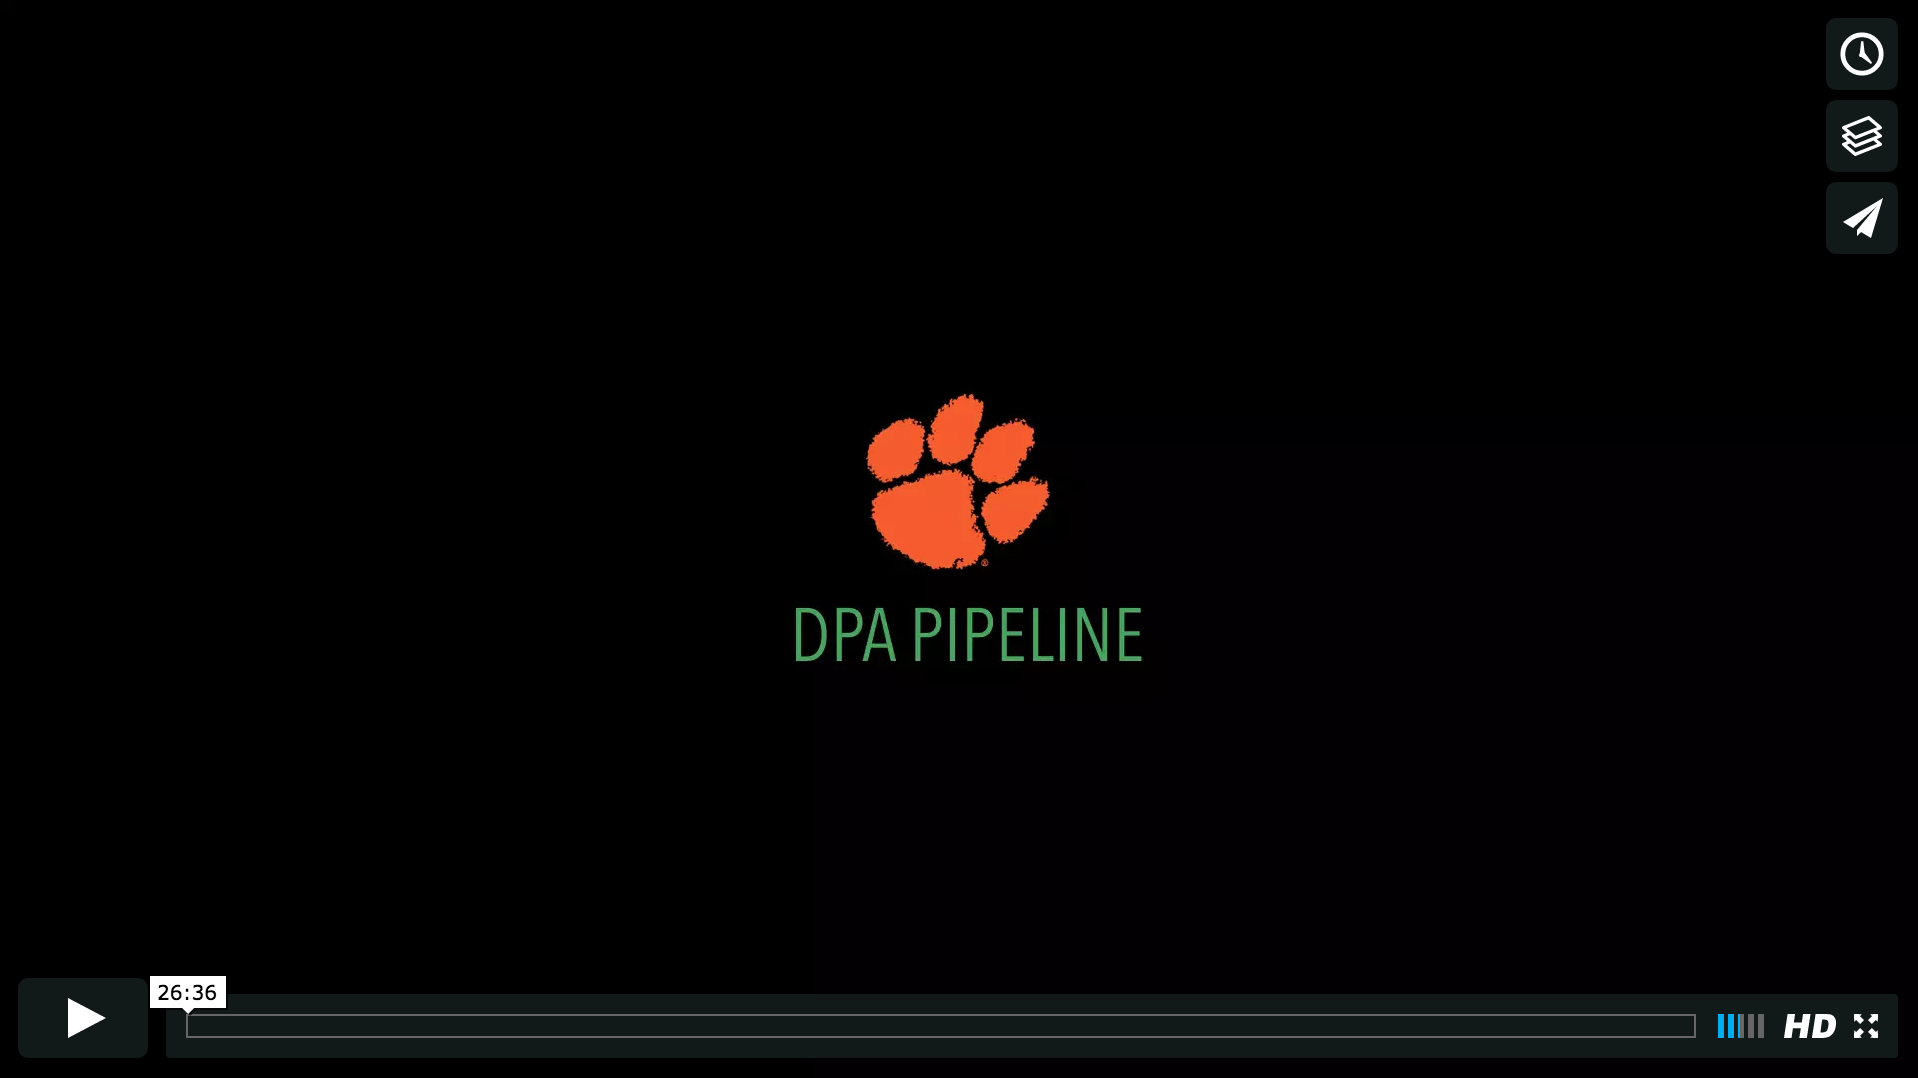 https://raw.githubusercontent.com/wiki/Clemson-DPA/dpa-pipe/images/DPA_Pipe_Overview_Play.png